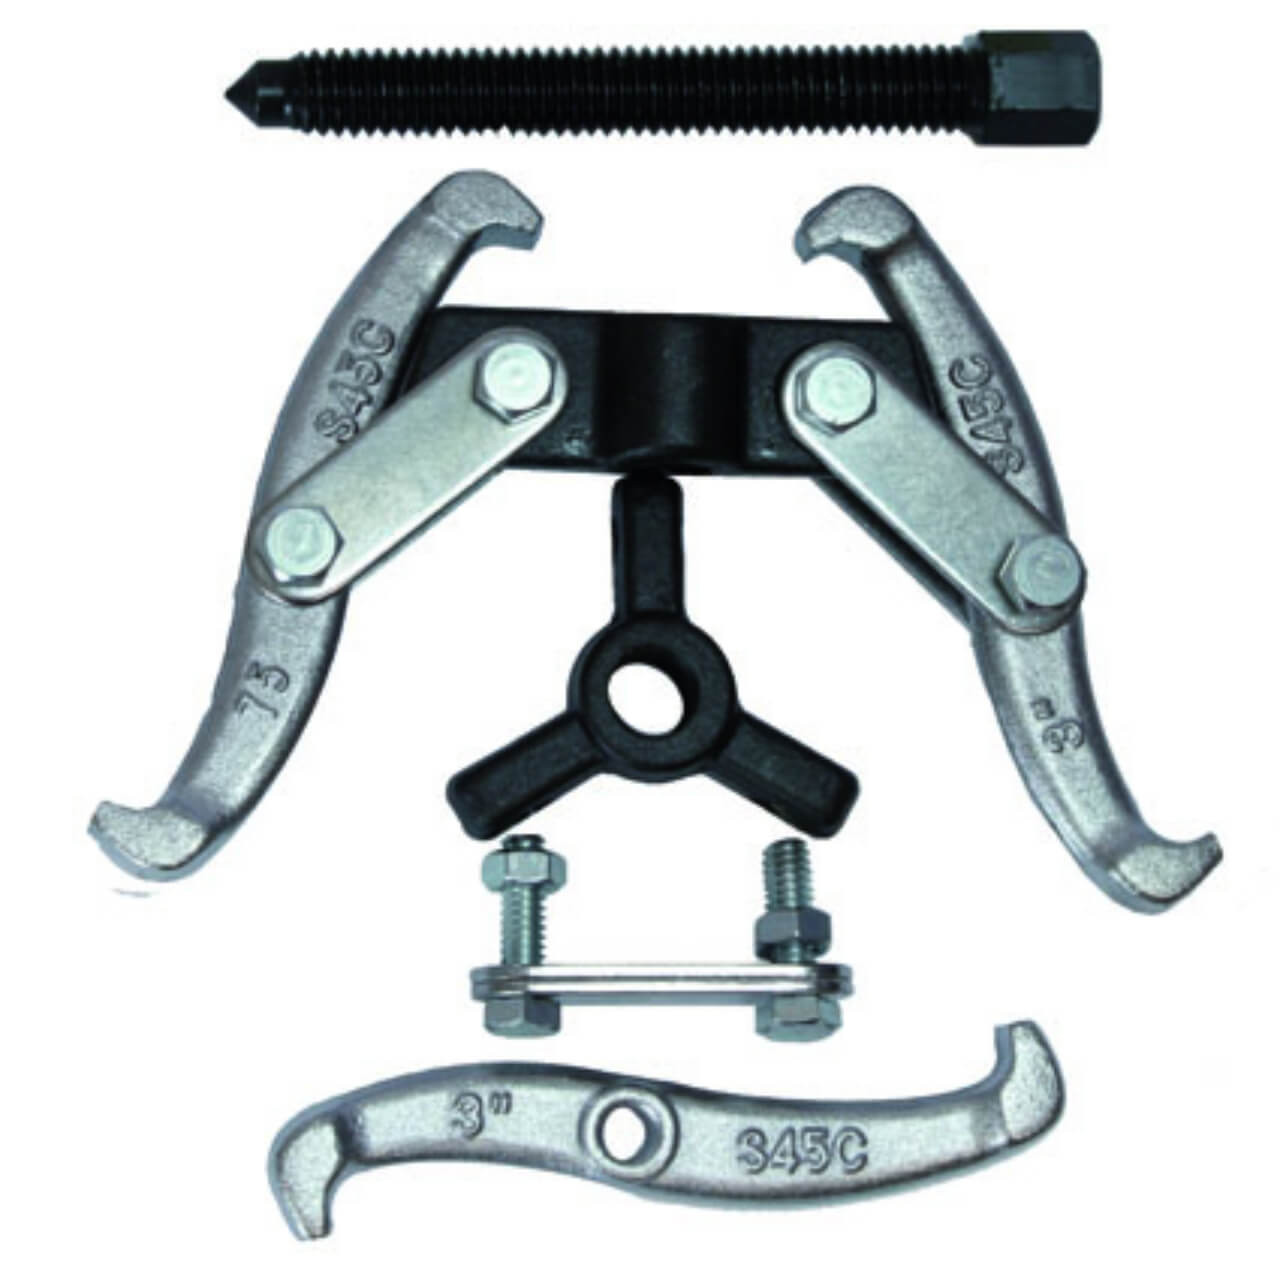 Mako 100mm (4”) Reversible Gear Puller 2 Jaw Or 3 Jaw